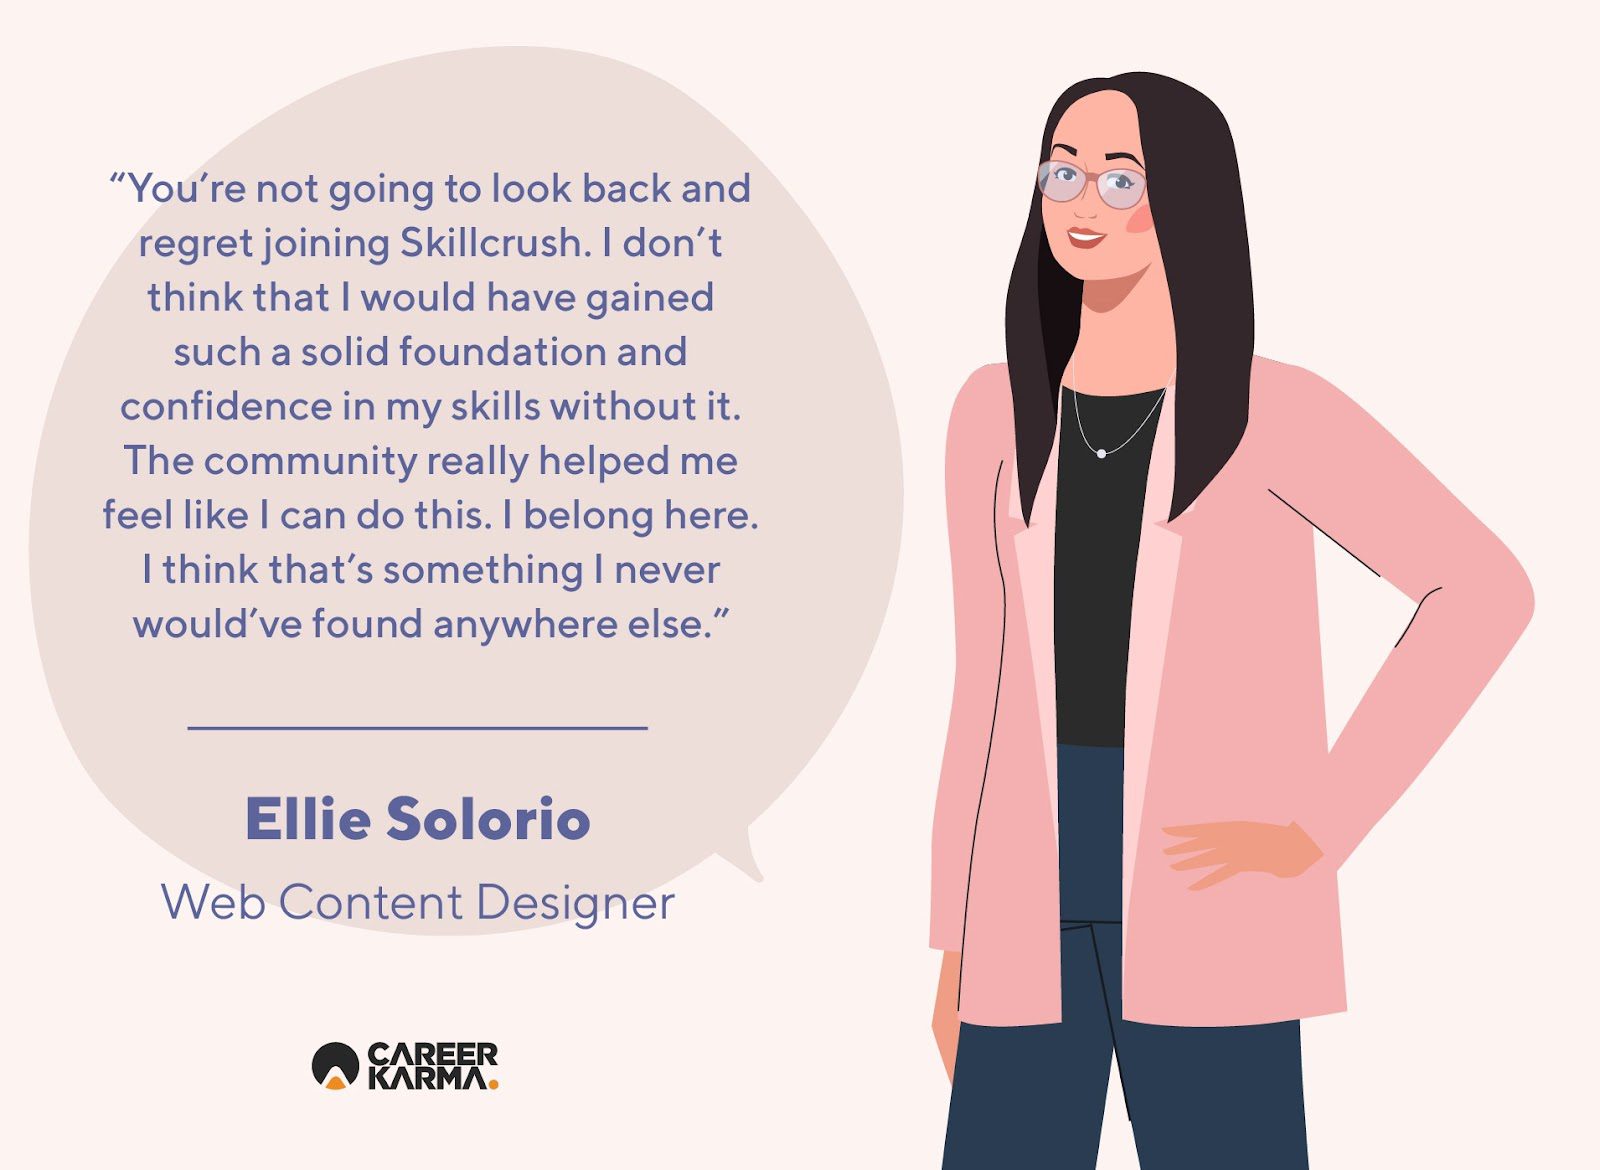 An infographic showing an alum’s review of Skillcrush